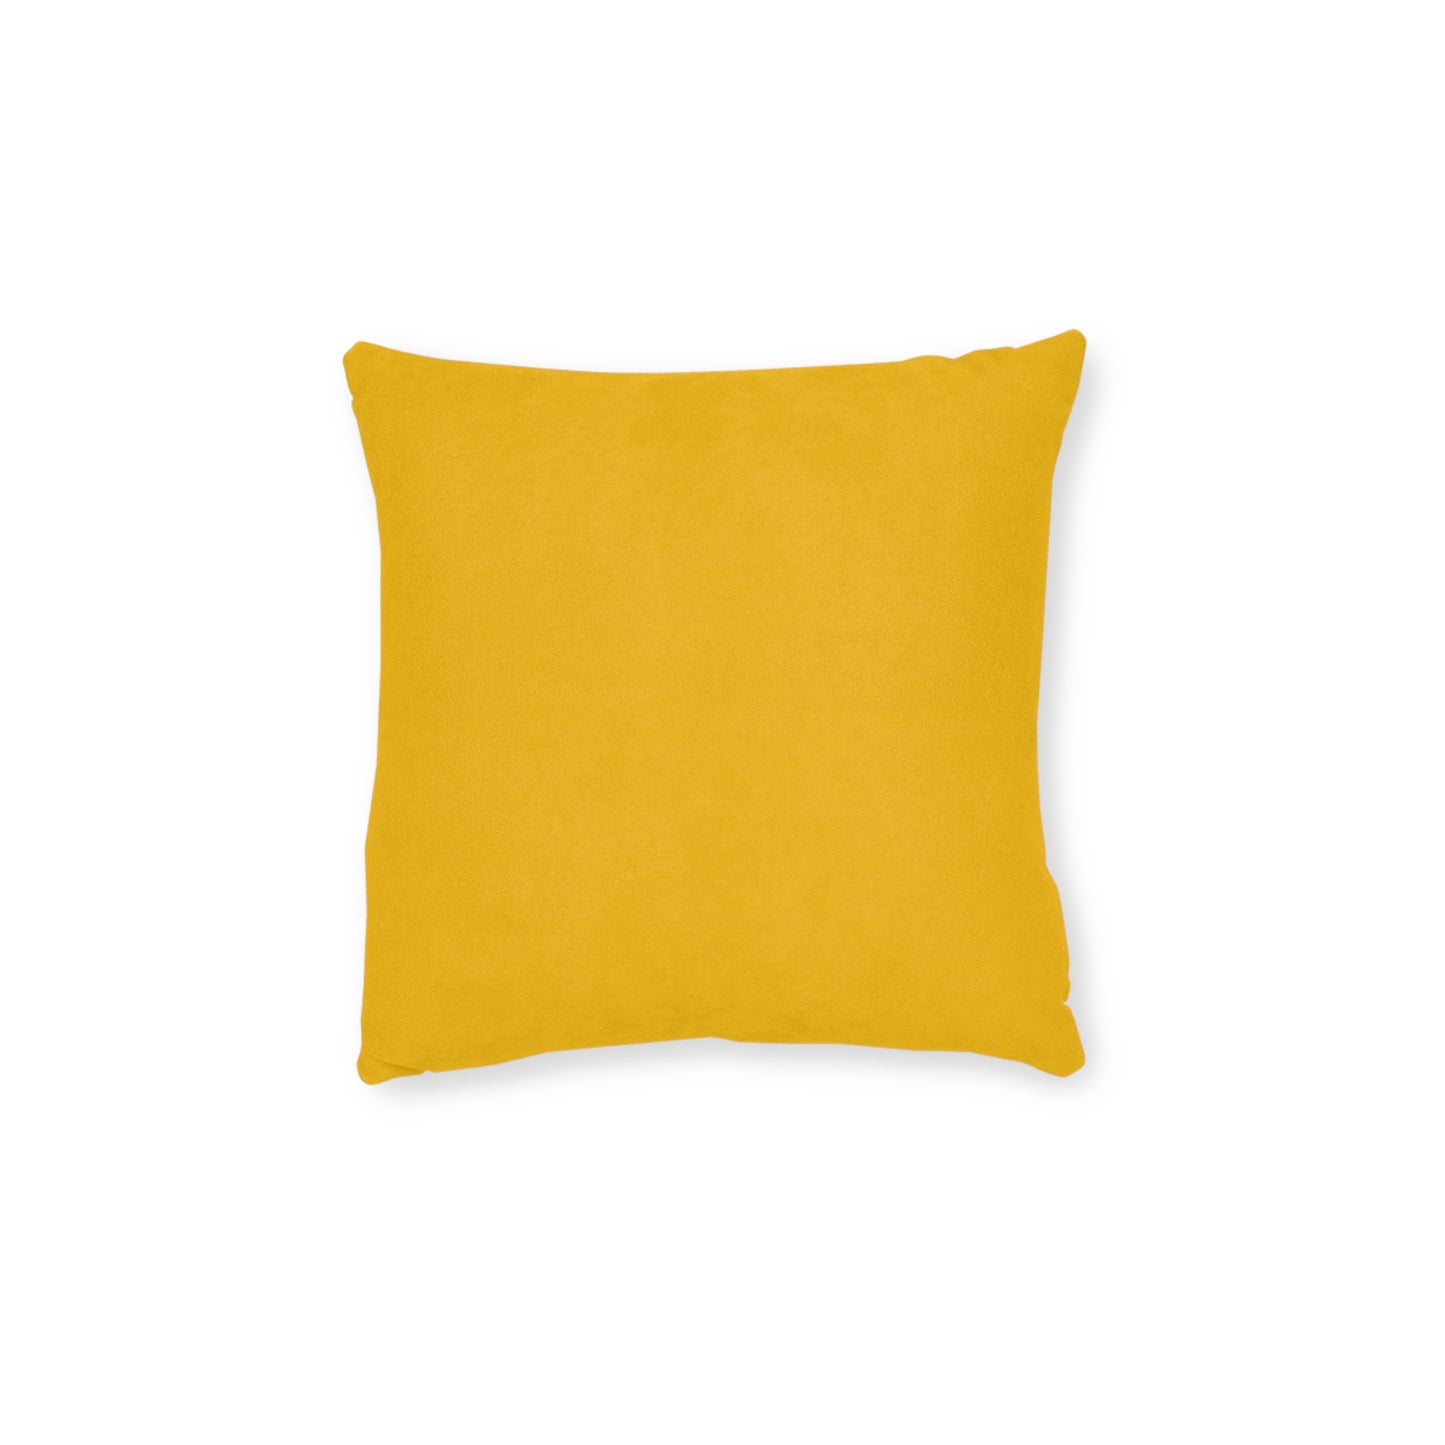 Coding In Progress Stay Away (Yellow) - Square Pillow